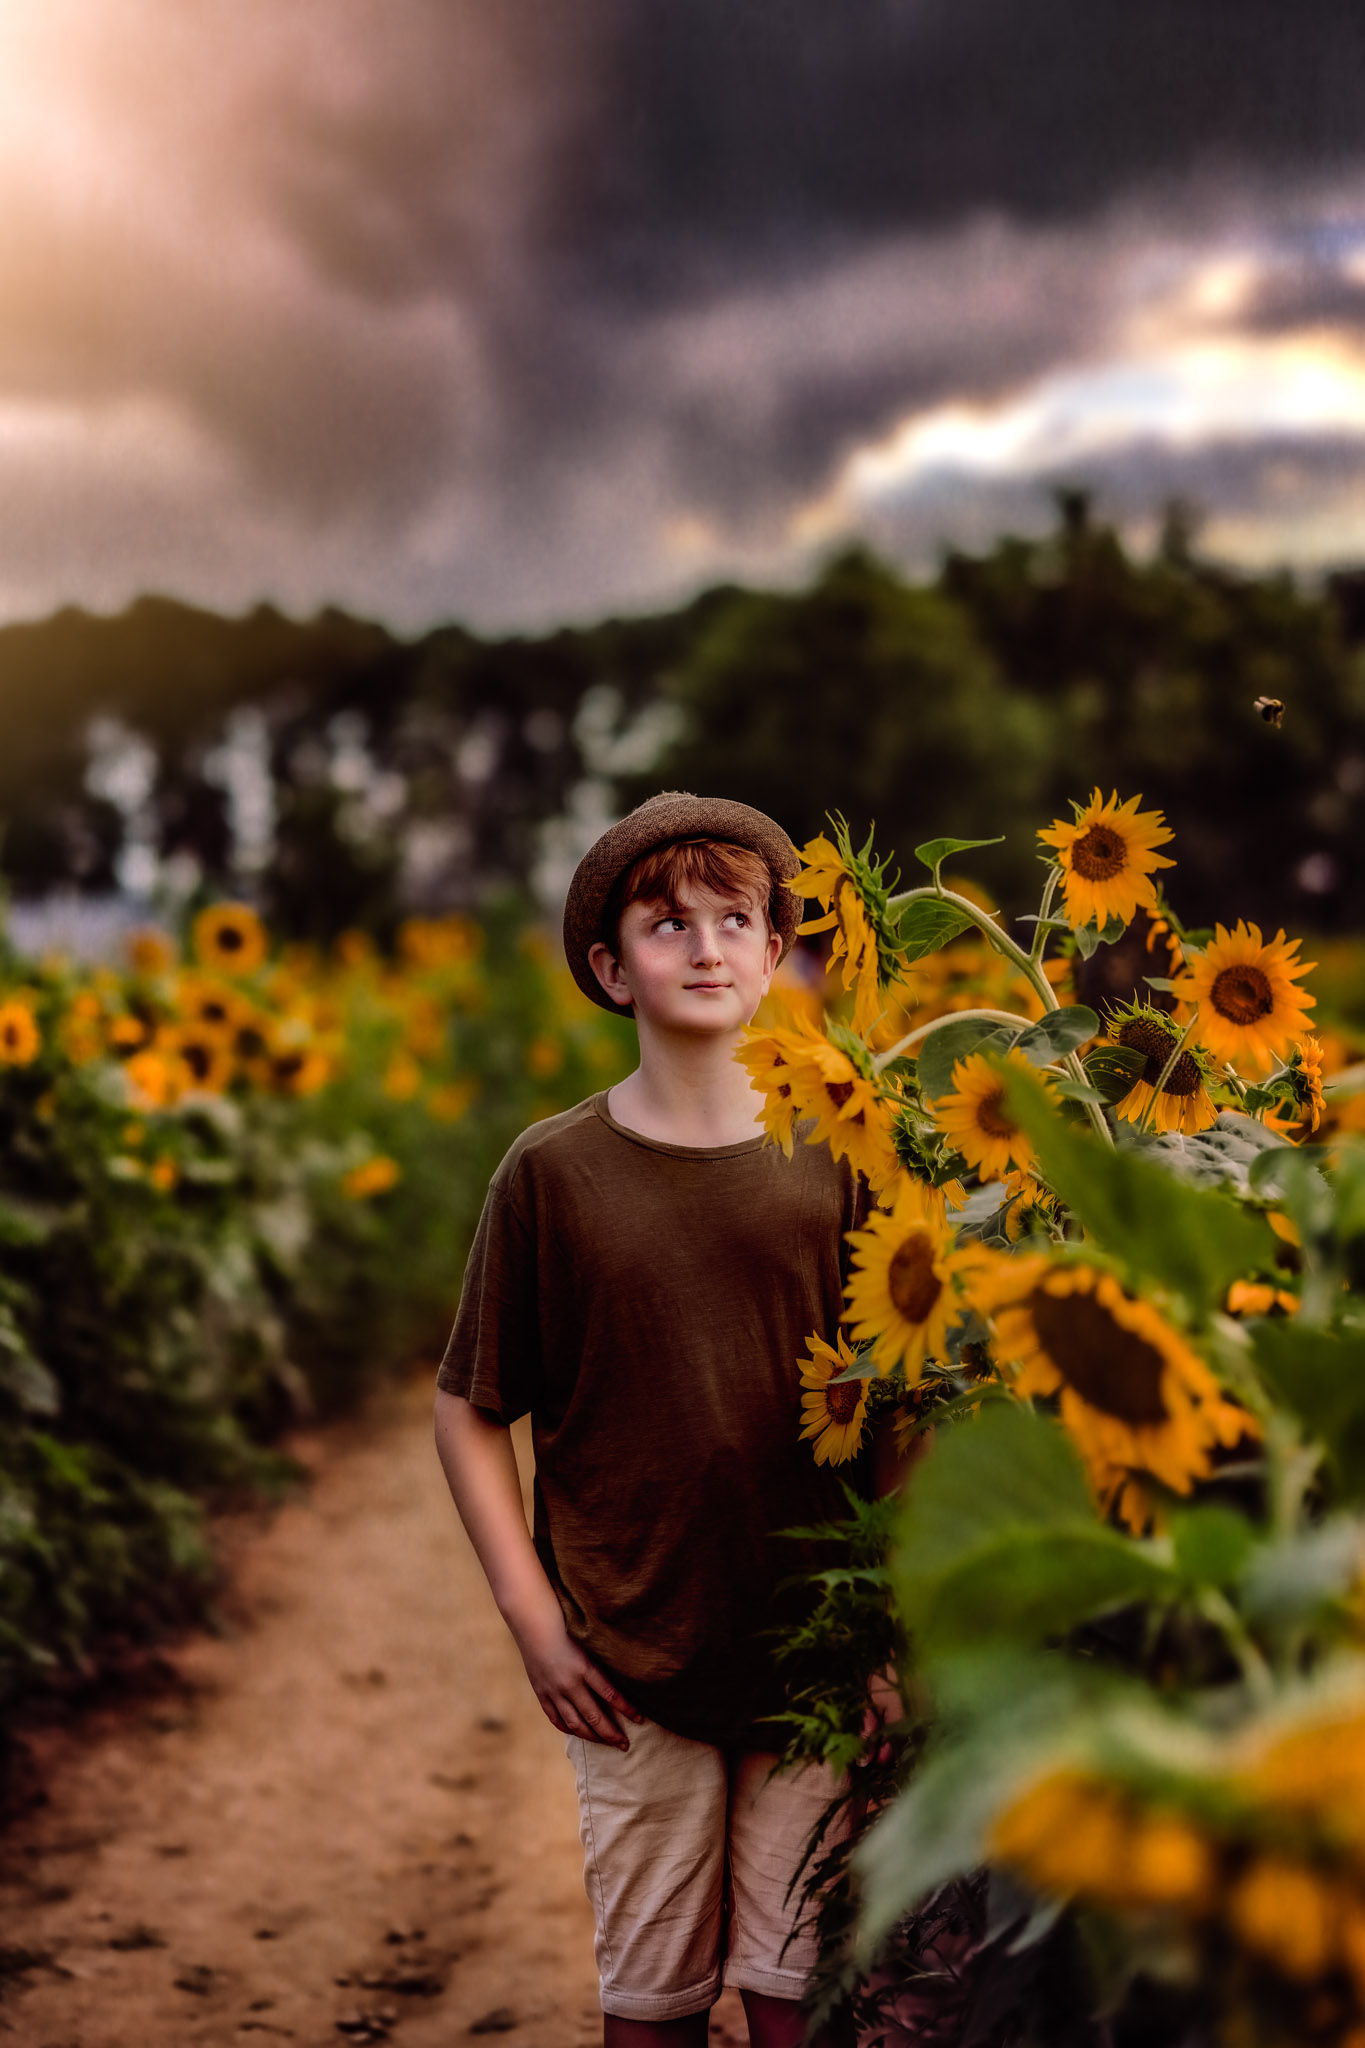 Young boy in the Raleigh sunflowers with a fedora hat glancing at a bee